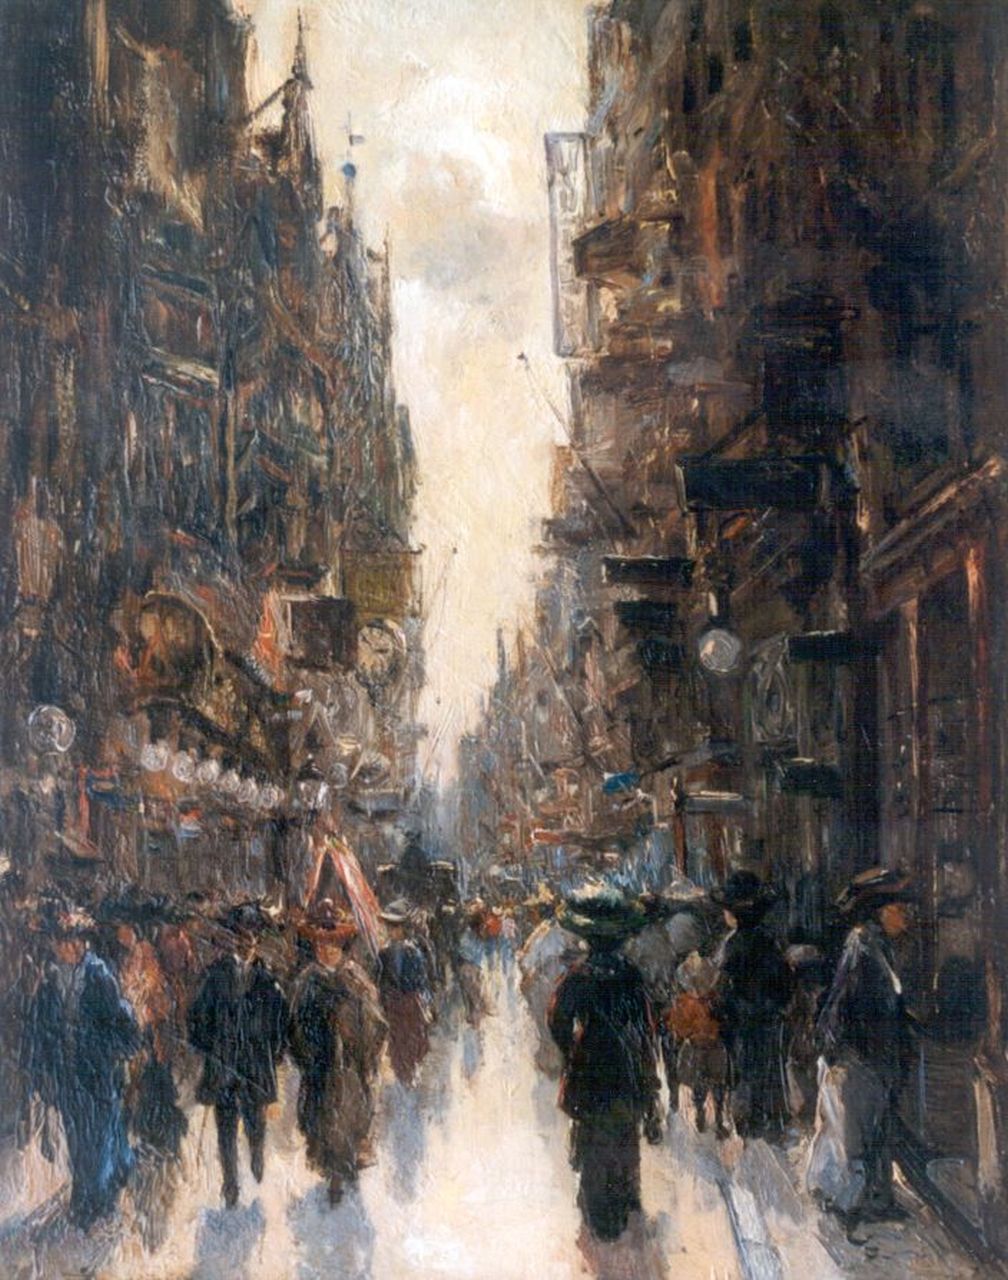 Helfferich F.W.  | Franciscus Willem 'Frans' Helfferich, Figures in a street, The Hague, oil on canvas 45.0 x 35.5 cm, signed l.l.